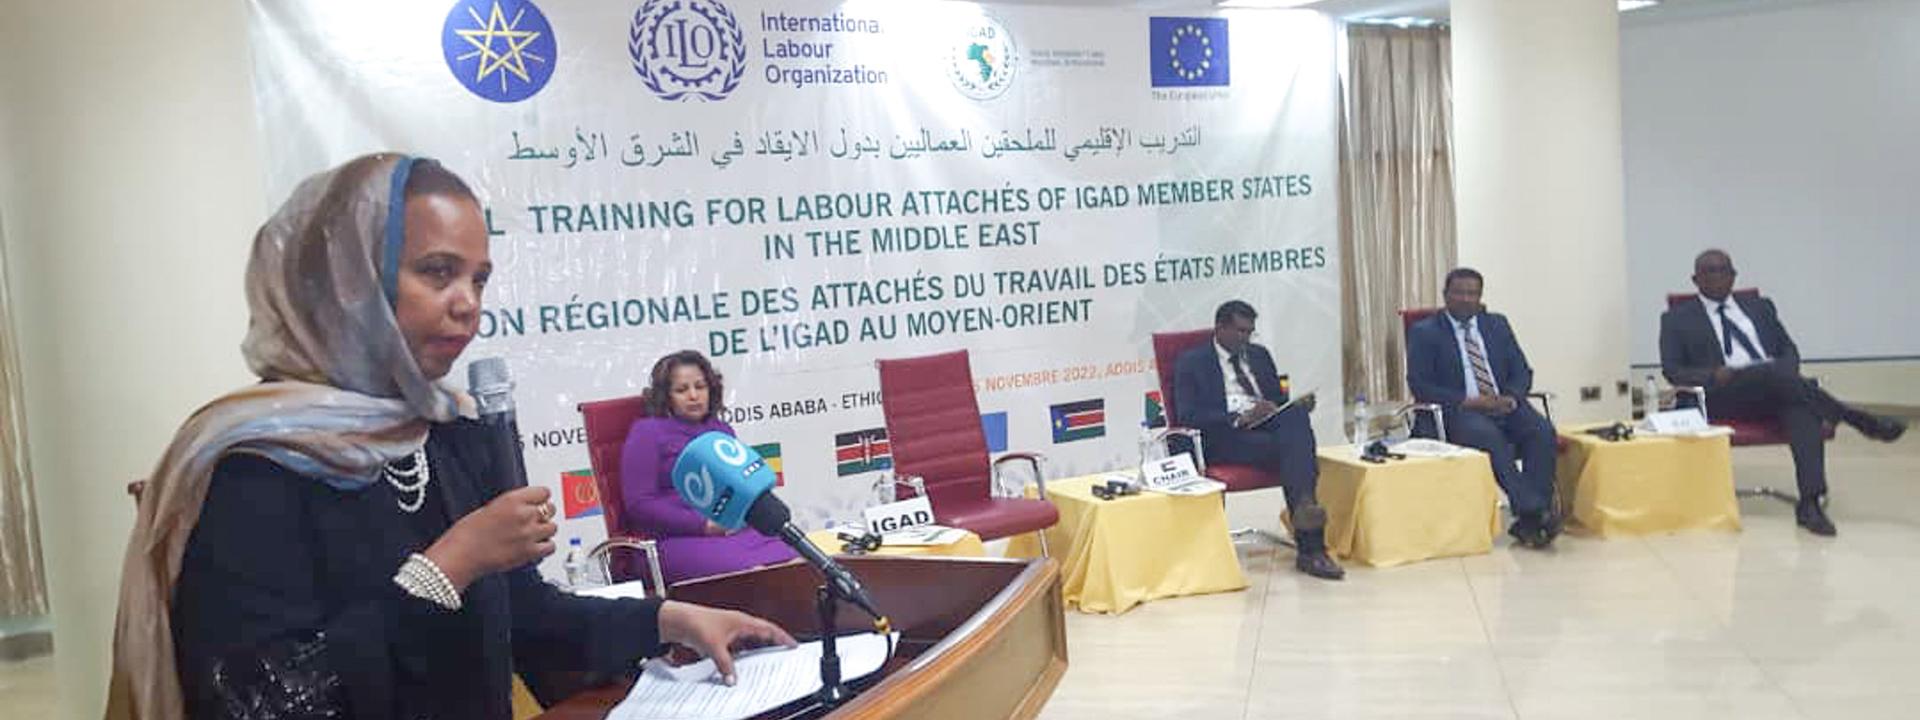 Remarks by the Director of the Health and Social Development Division of IGAD on behalf the Executive Secretary at the Regional Training for Labour Attachés on Labour Migration Governance  November 21, 2022, Addis Ababa, Ethiopia